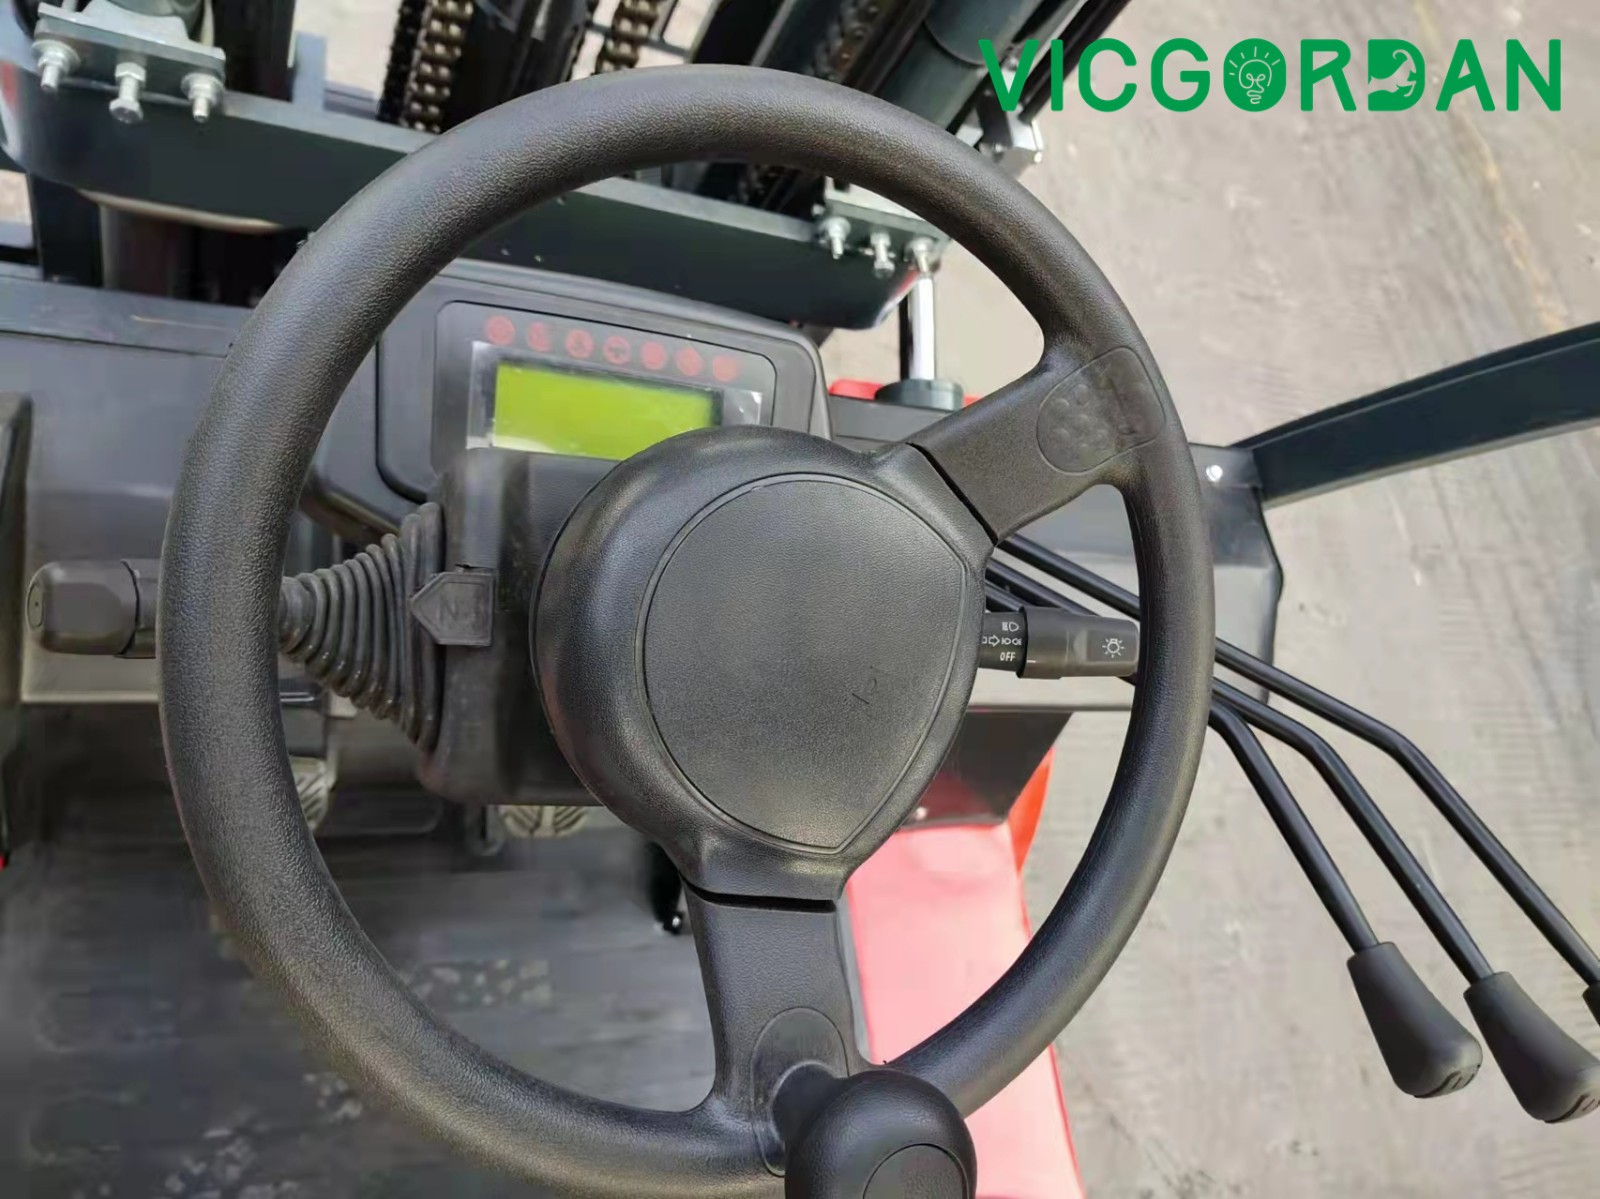 Vicgordan 5 ton forklift with high class engine and mast is going to Chile